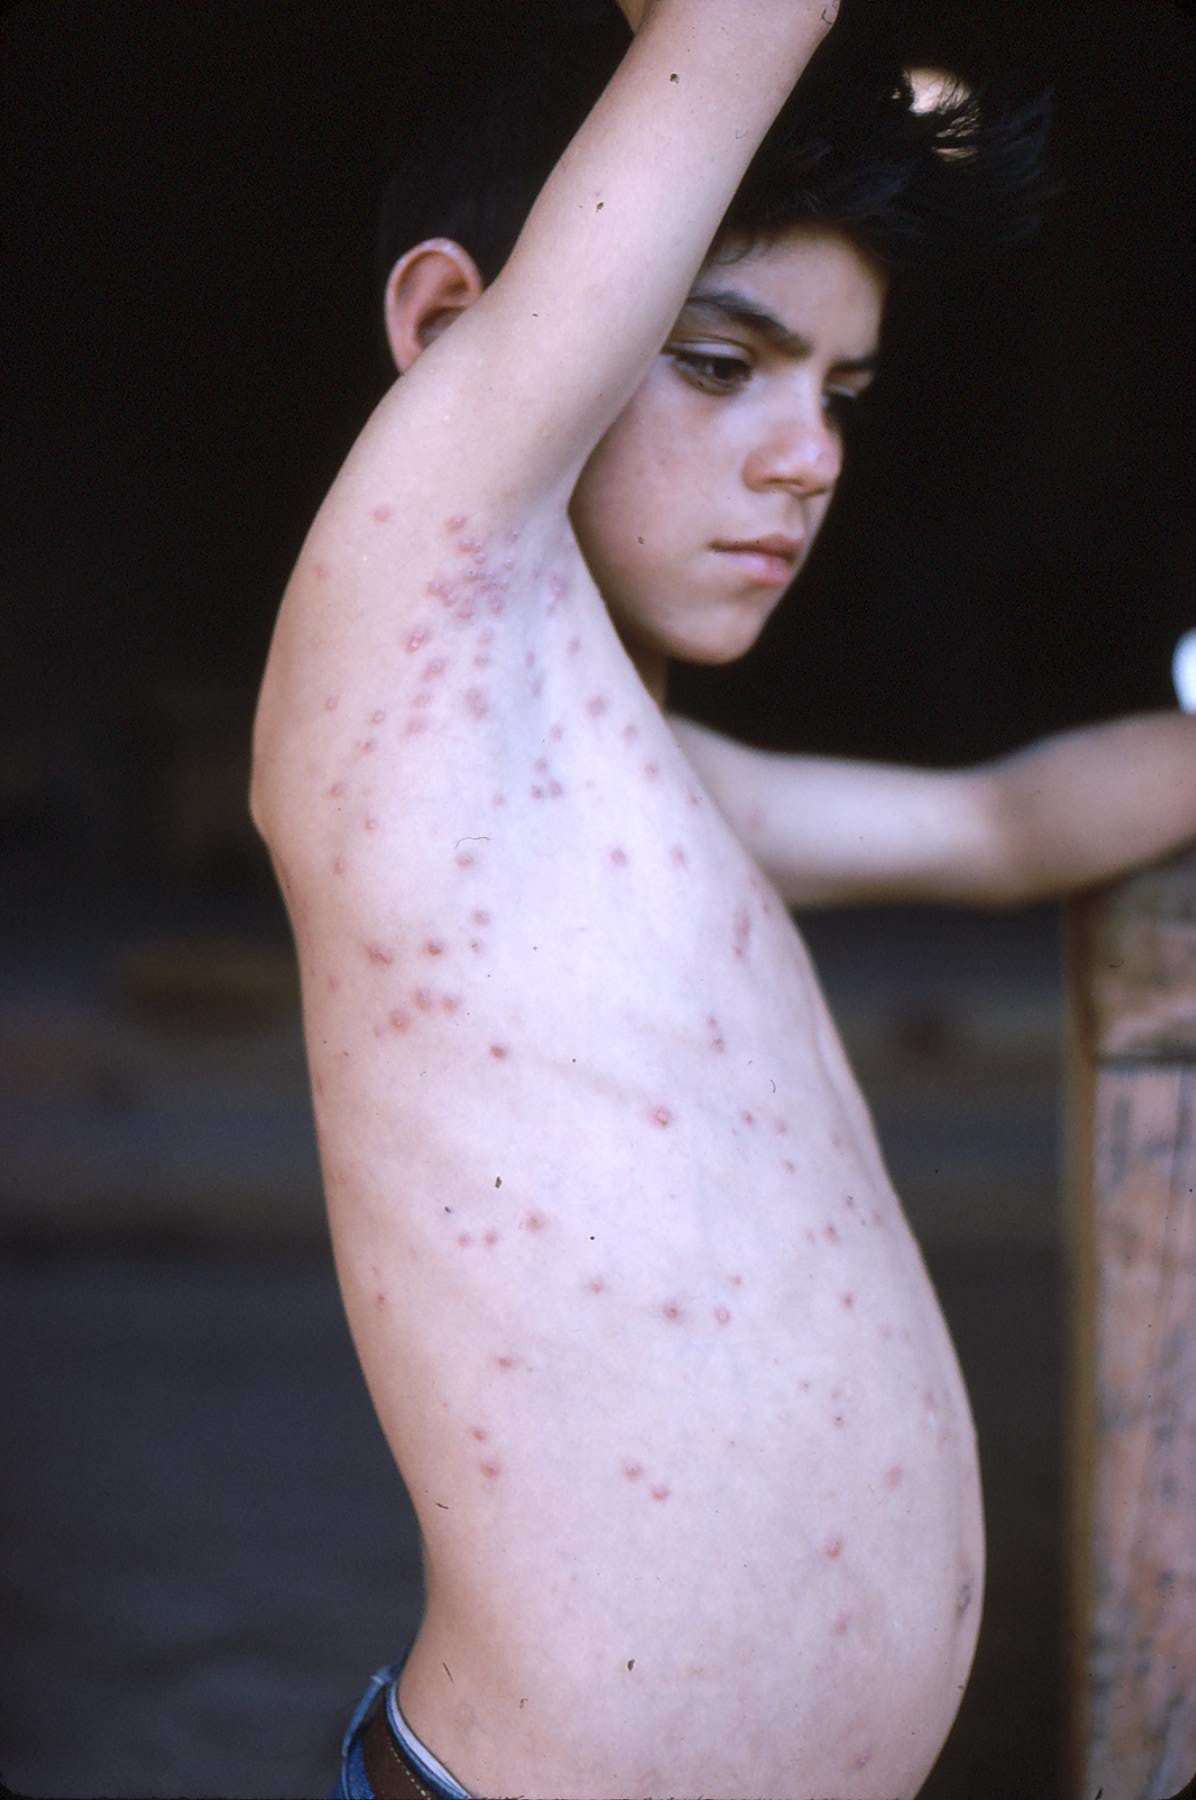 Measles was epidemic in the Sierra Madre before vaccination.